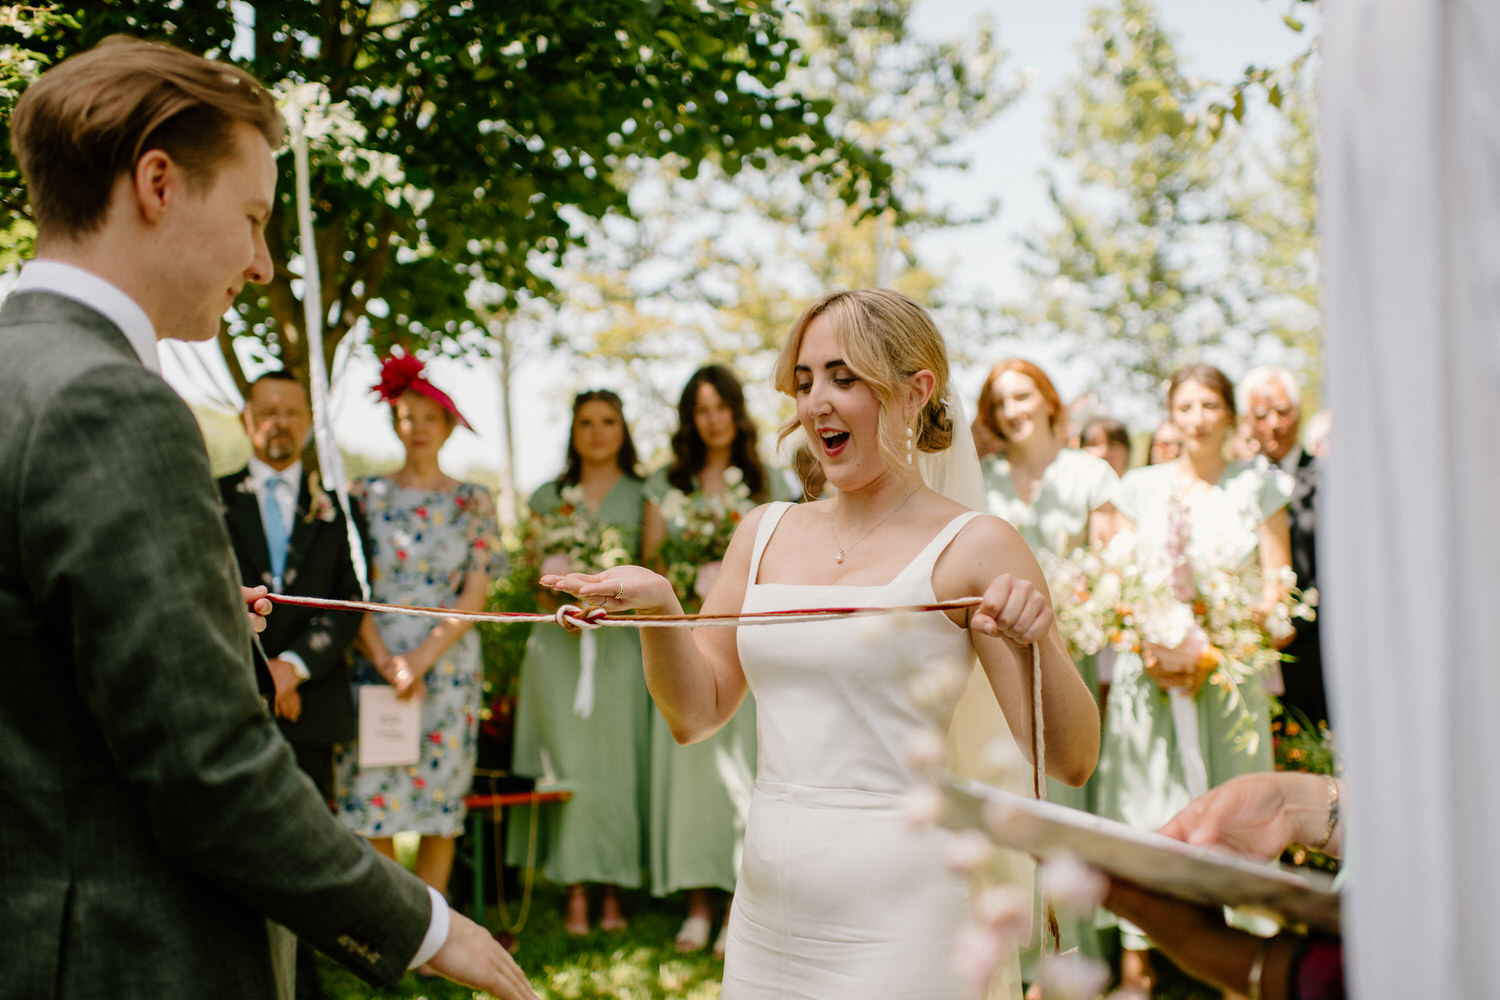 Handfasting style wedding ceremony in the sunshine. The bride wears a simple modern halter neck dress. With Ellie Gillard Photography